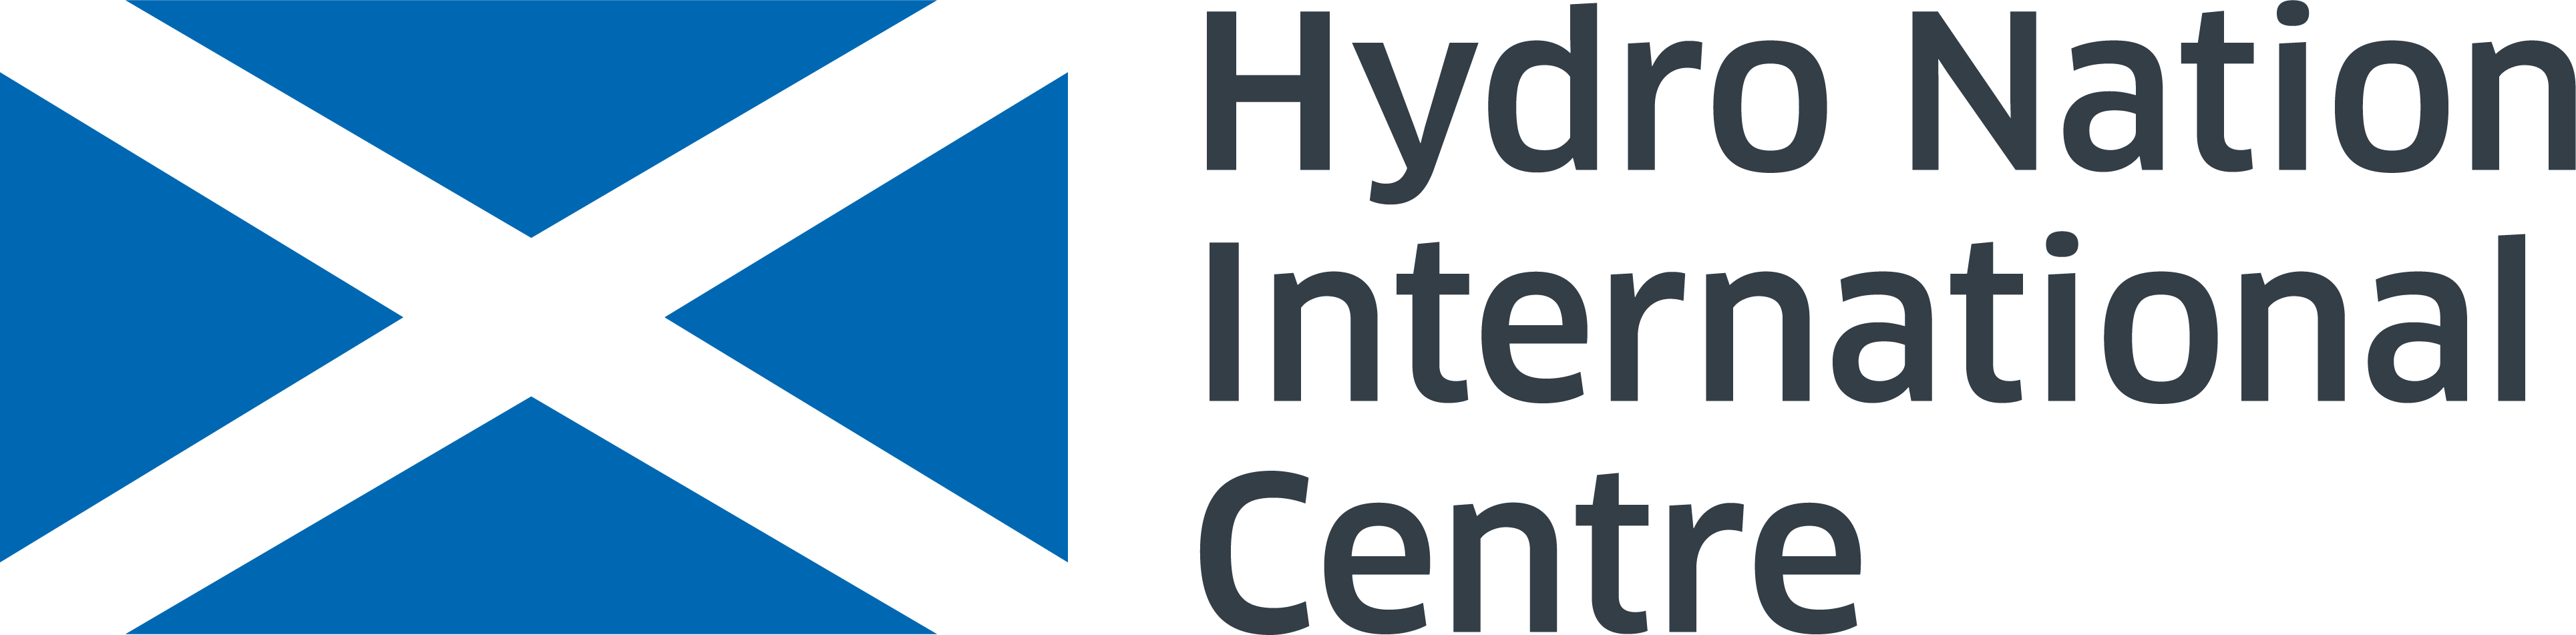 Hydro Nation International Centre &ndash; World Water Day, 22nd March 2023, Edinburgh International Conference Centre (EICC), with live stream. http...